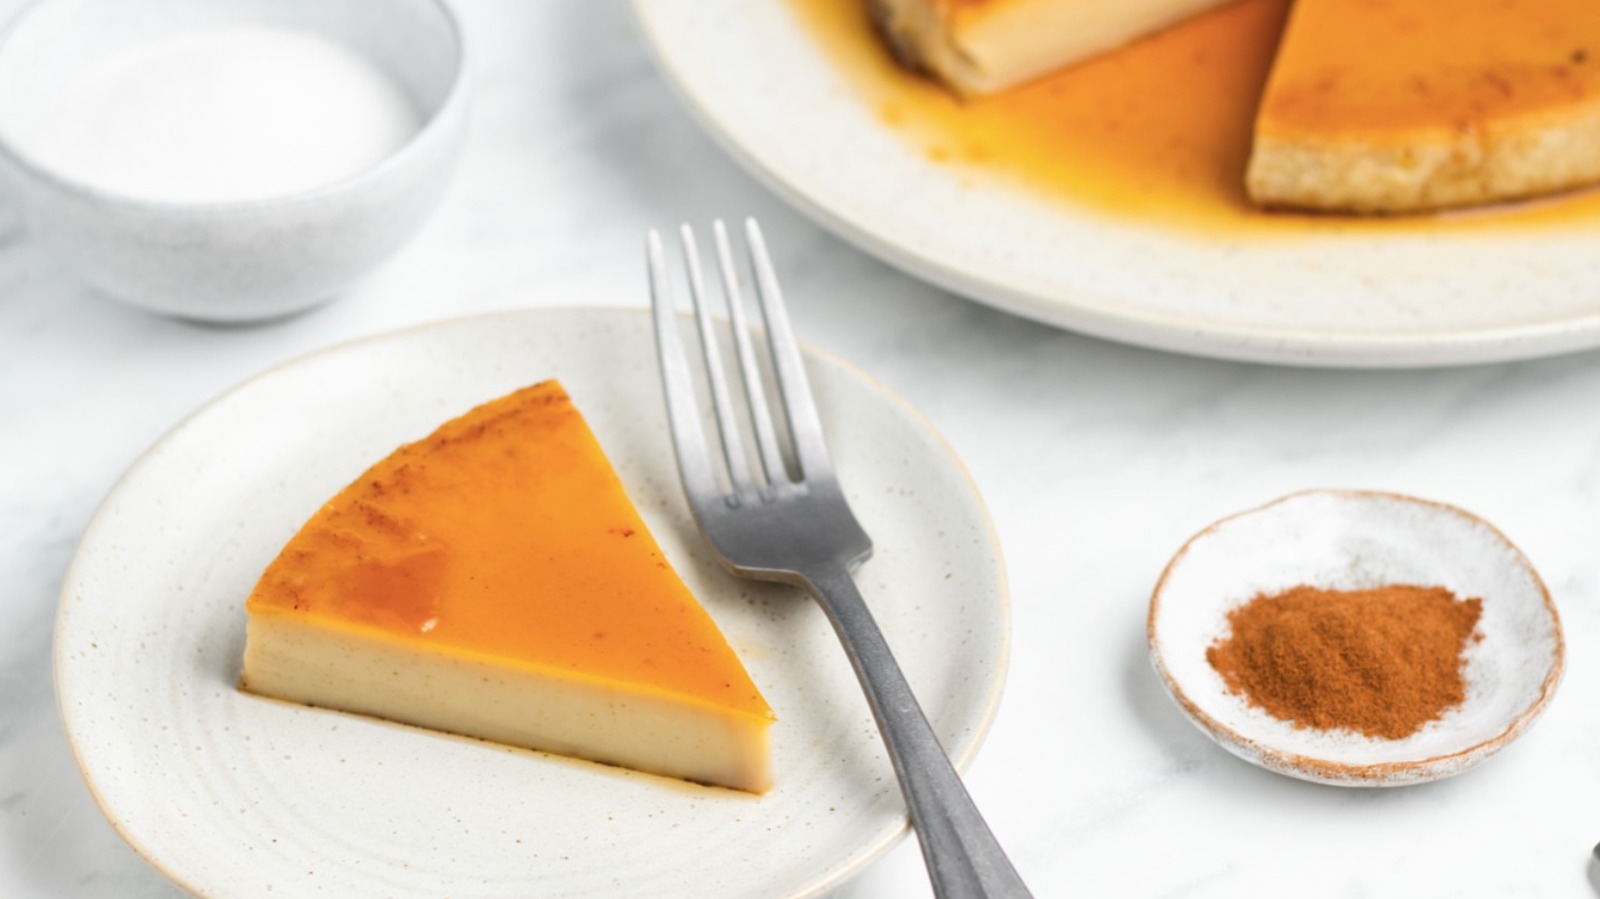 Spanish Flan Recipe - Also The Crumbs Please